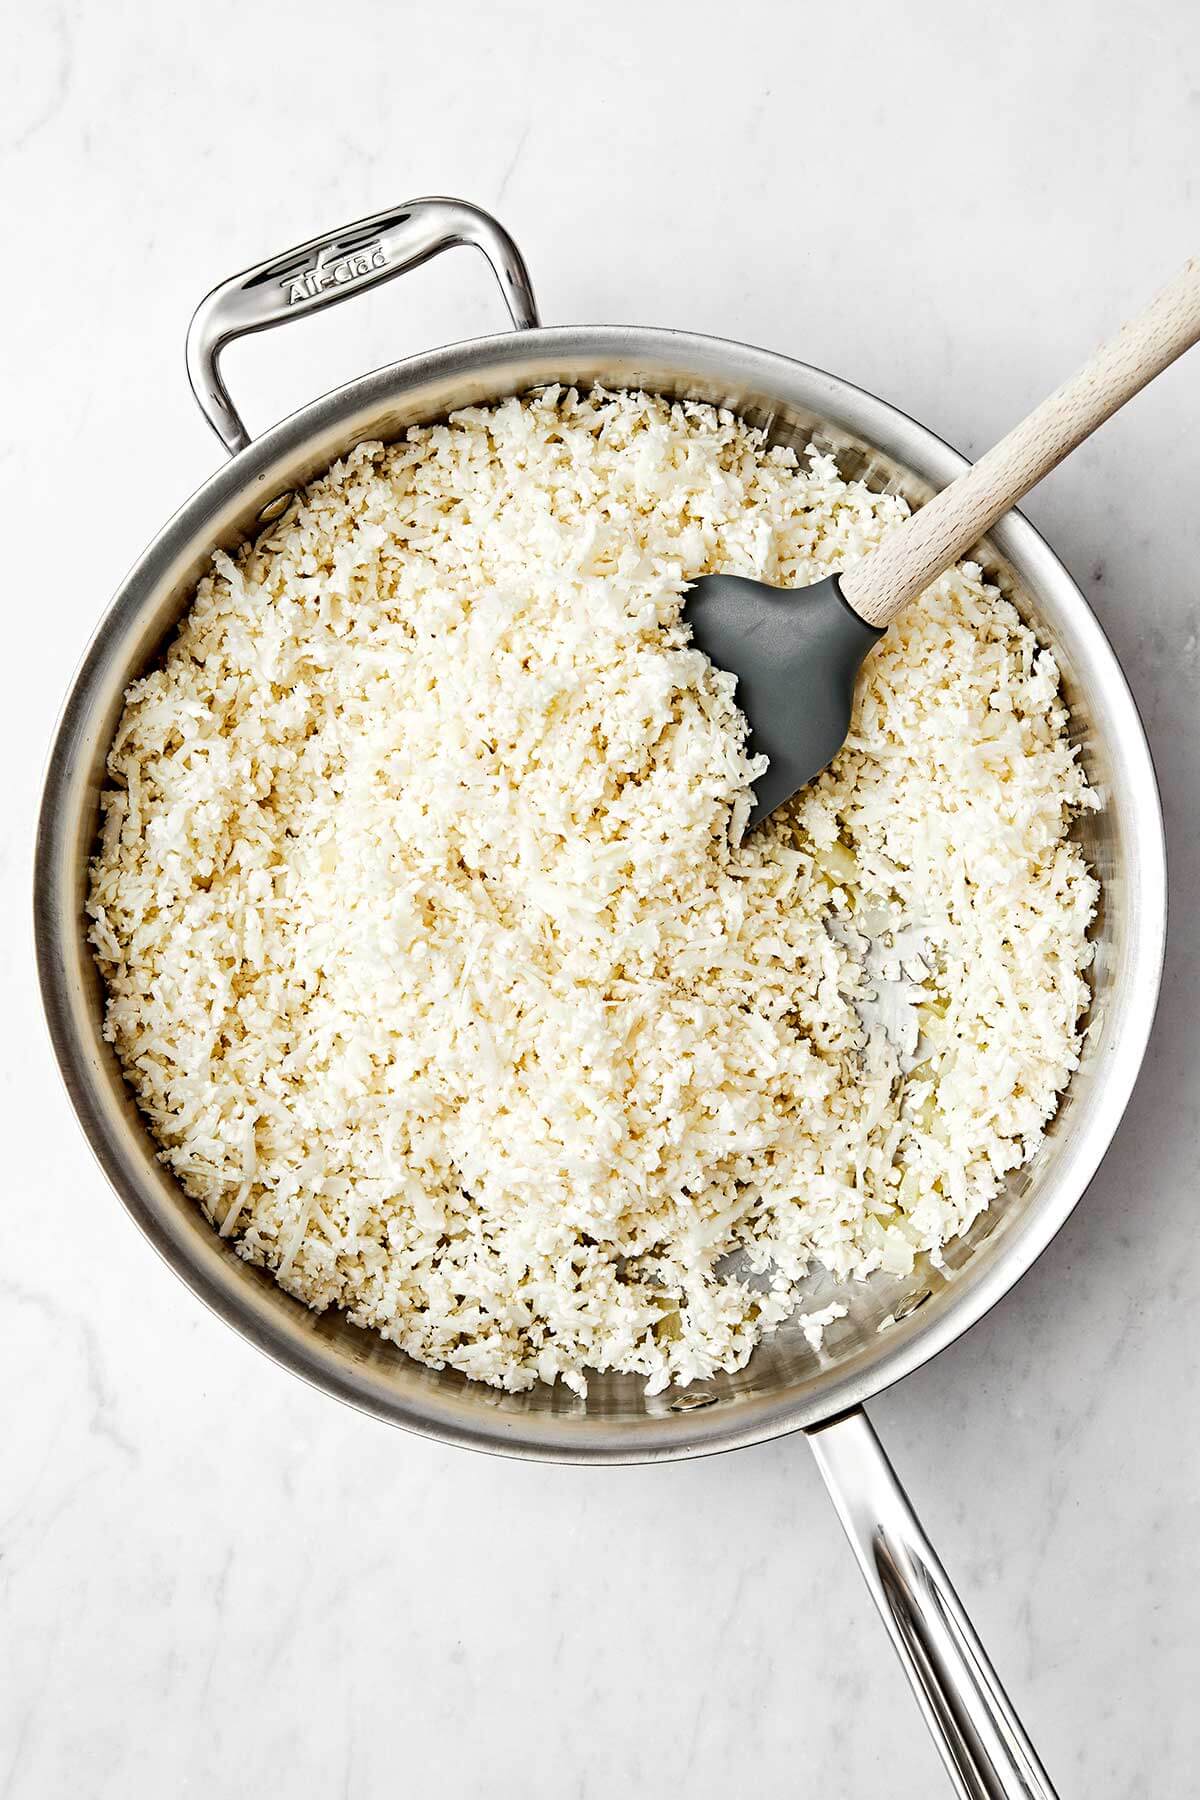 Cooking cauliflower rice in a pan.